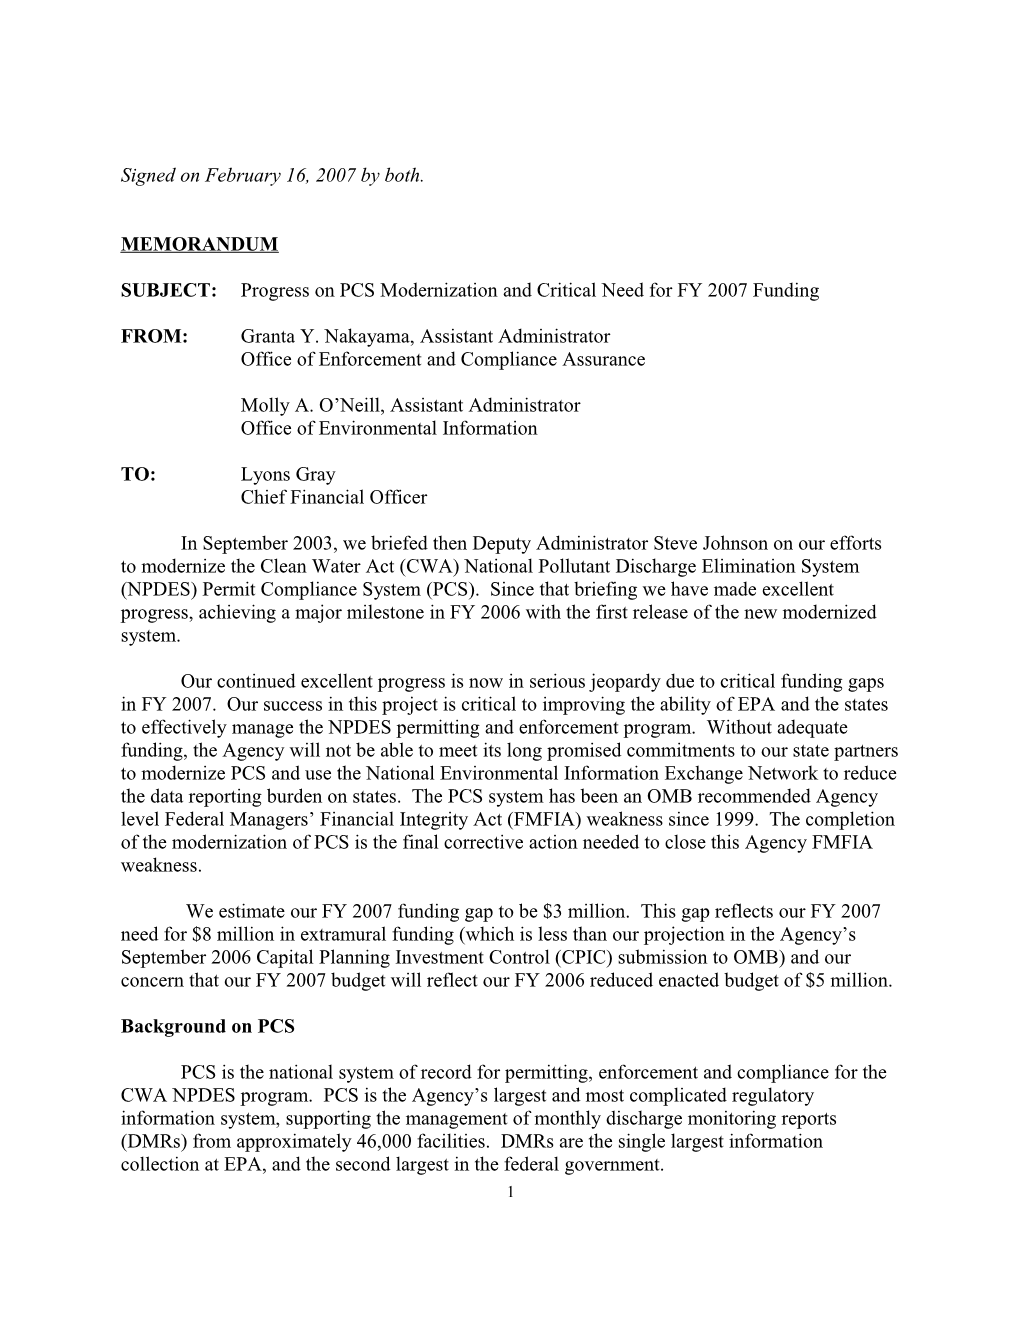 SUBJECT: Progress on PCS Modernization and Critical Need for FY 2007 Funding